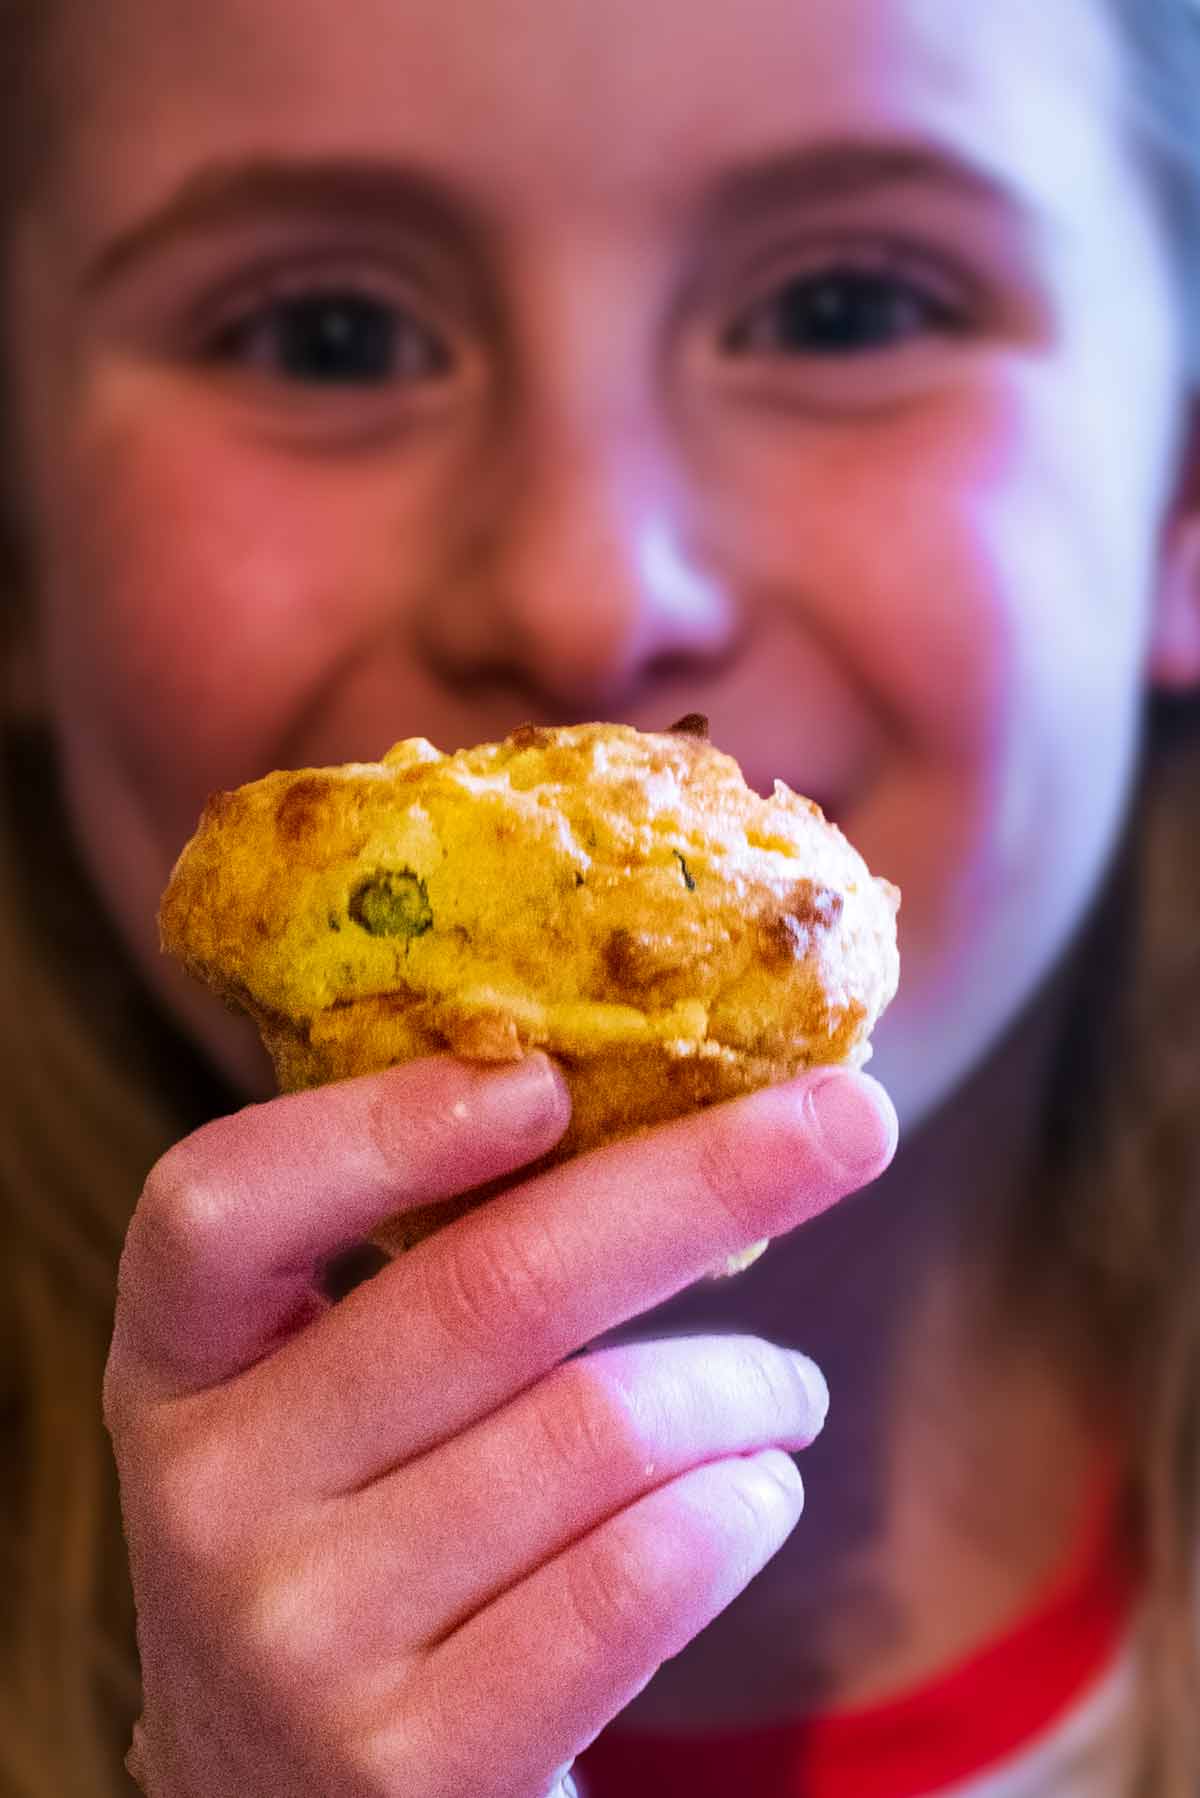 A child holding a muffin in front of her face.